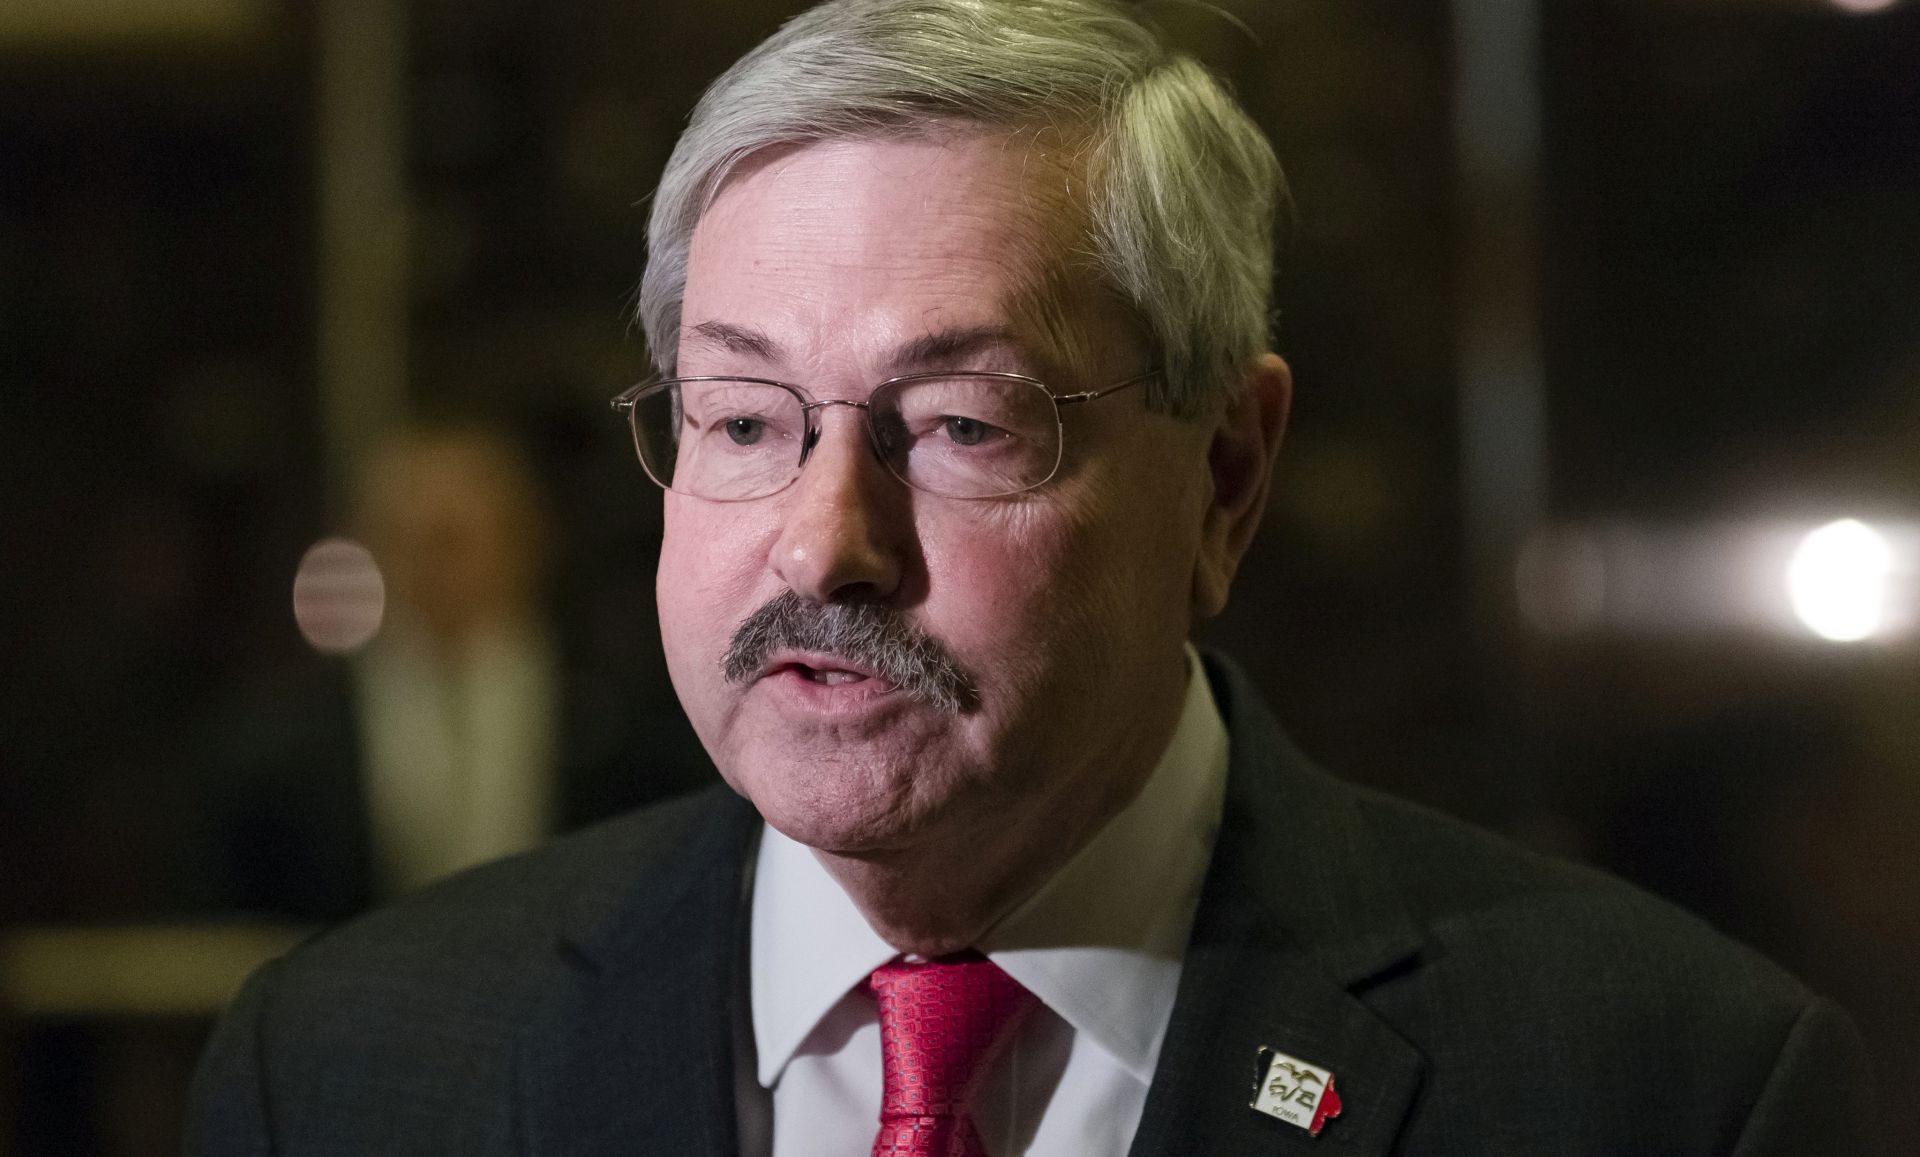 epa05664412 (FILE) A file photo dated 06 December 2016 shows Terry Branstad, Governor of the State of Iowa, speaking to media following his meeting with US President-elect Trump at Trump Tower in New York, New York, USA. According to reports on 07 December 2016, US President-elect Donald Trump has chosen Branstad to serve as US ambassador to China.  EPA/ALBIN LOHR-JONES / POOL